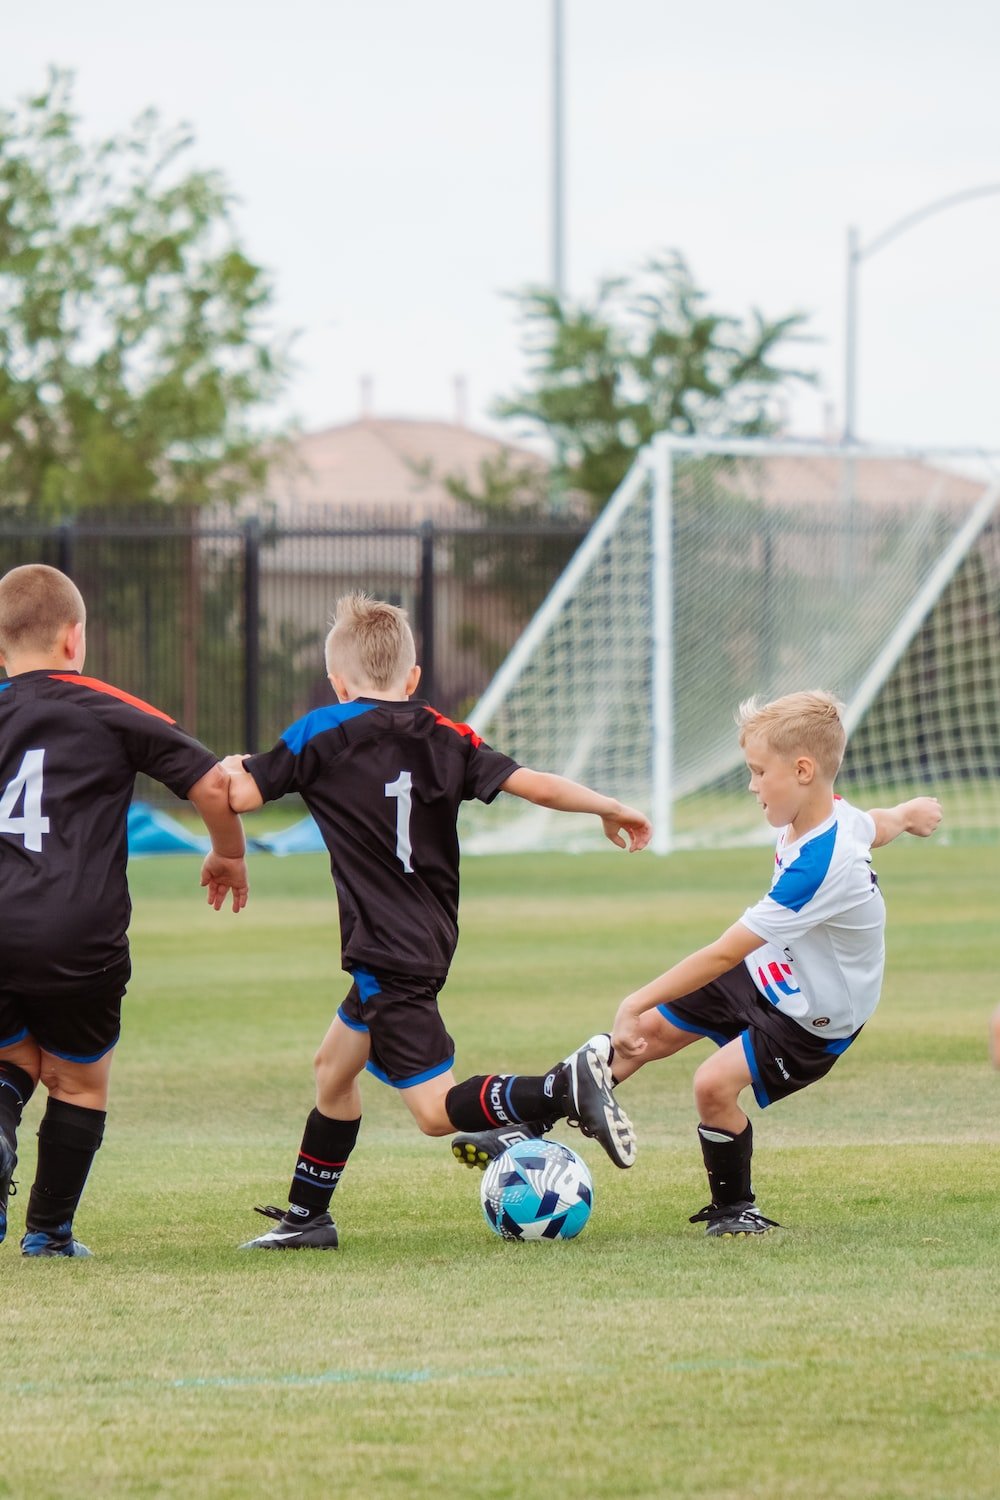 Children Football Picture. Download Free Image